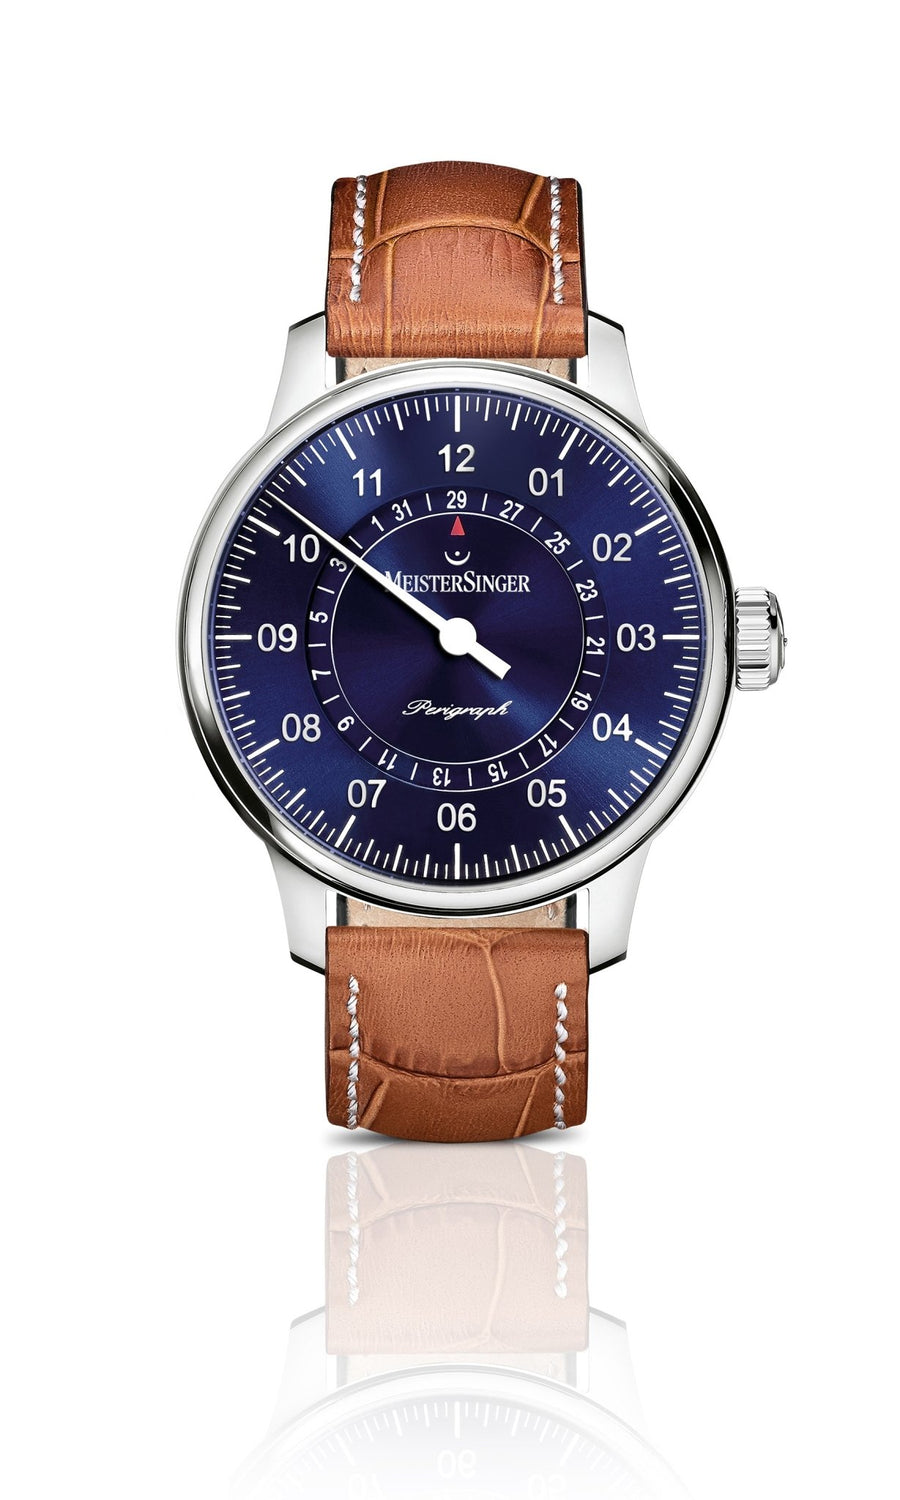 MeisterSinger: Perigraph - The Independent CollectiveMeisterSinger: Perigraph - The Independent Collective Watches